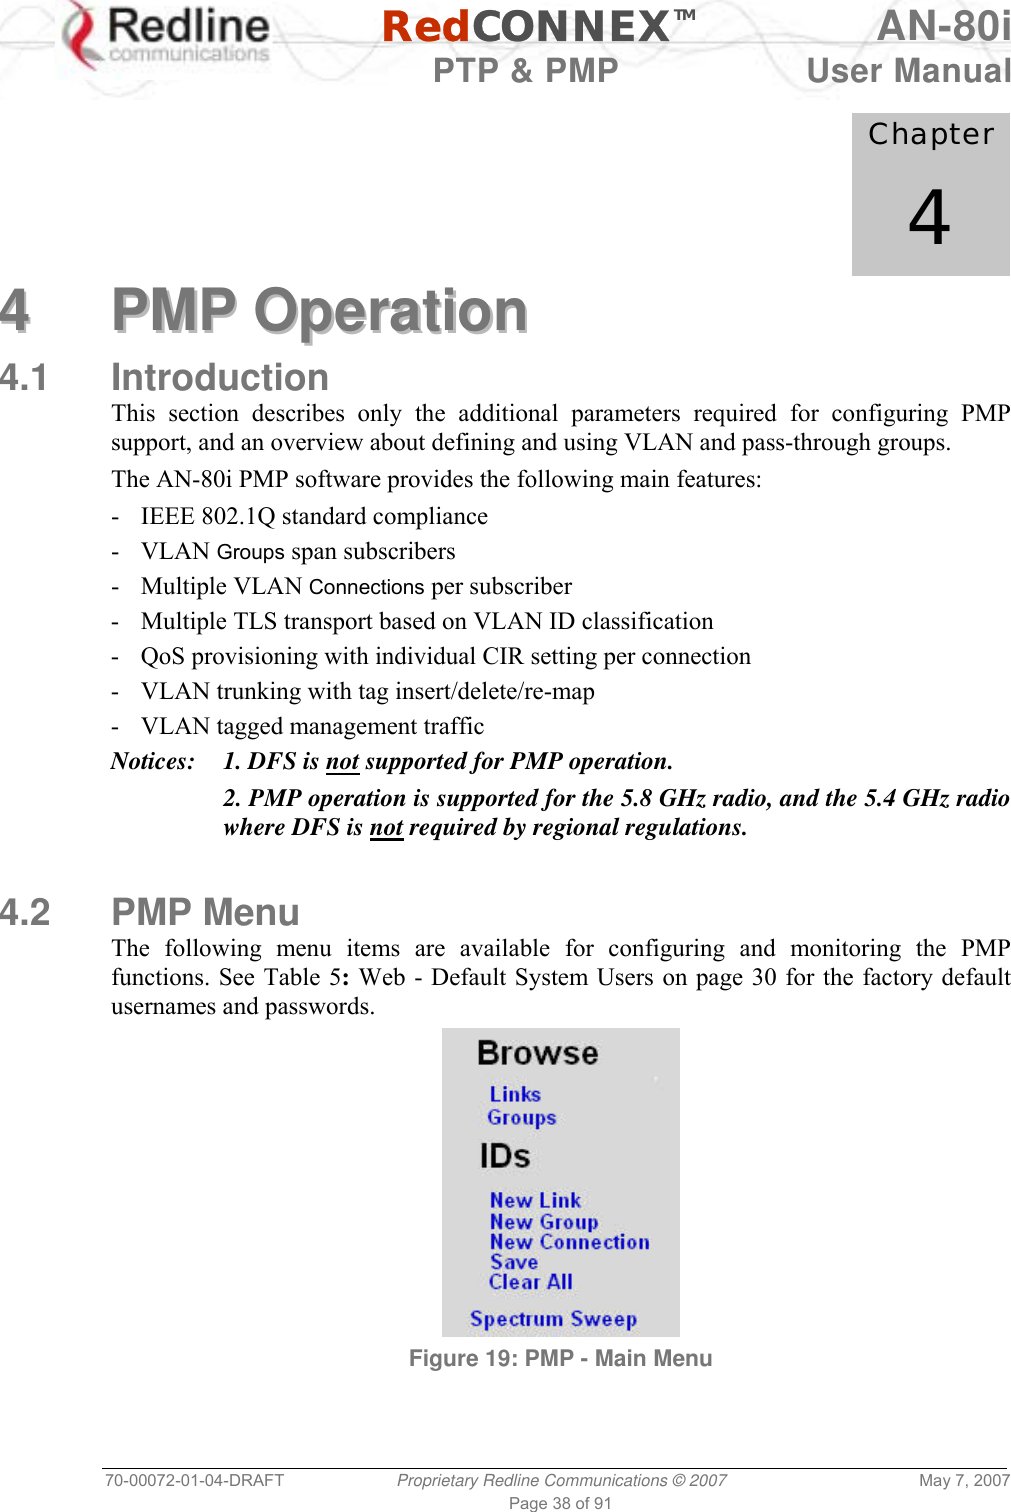   RedCONNEXTM AN-80i   PTP &amp; PMP  User Manual 70-00072-01-04-DRAFT  Proprietary Redline Communications © 2007  May 7, 2007 Page 38 of 91             Chapter 4 44  PPMMPP  OOppeerraattiioonn  4.1 Introduction This section describes only the additional parameters required for configuring PMP support, and an overview about defining and using VLAN and pass-through groups. The AN-80i PMP software provides the following main features: -  IEEE 802.1Q standard compliance - VLAN Groups span subscribers - Multiple VLAN Connections per subscriber -  Multiple TLS transport based on VLAN ID classification  -  QoS provisioning with individual CIR setting per connection -  VLAN trunking with tag insert/delete/re-map -  VLAN tagged management traffic Notices:  1. DFS is not supported for PMP operation.   2. PMP operation is supported for the 5.8 GHz radio, and the 5.4 GHz radio where DFS is not required by regional regulations.    4.2 PMP Menu The following menu items are available for configuring and monitoring the PMP functions. See Table 5: Web - Default System Users on page 30 for the factory default usernames and passwords.  Figure 19: PMP - Main Menu 